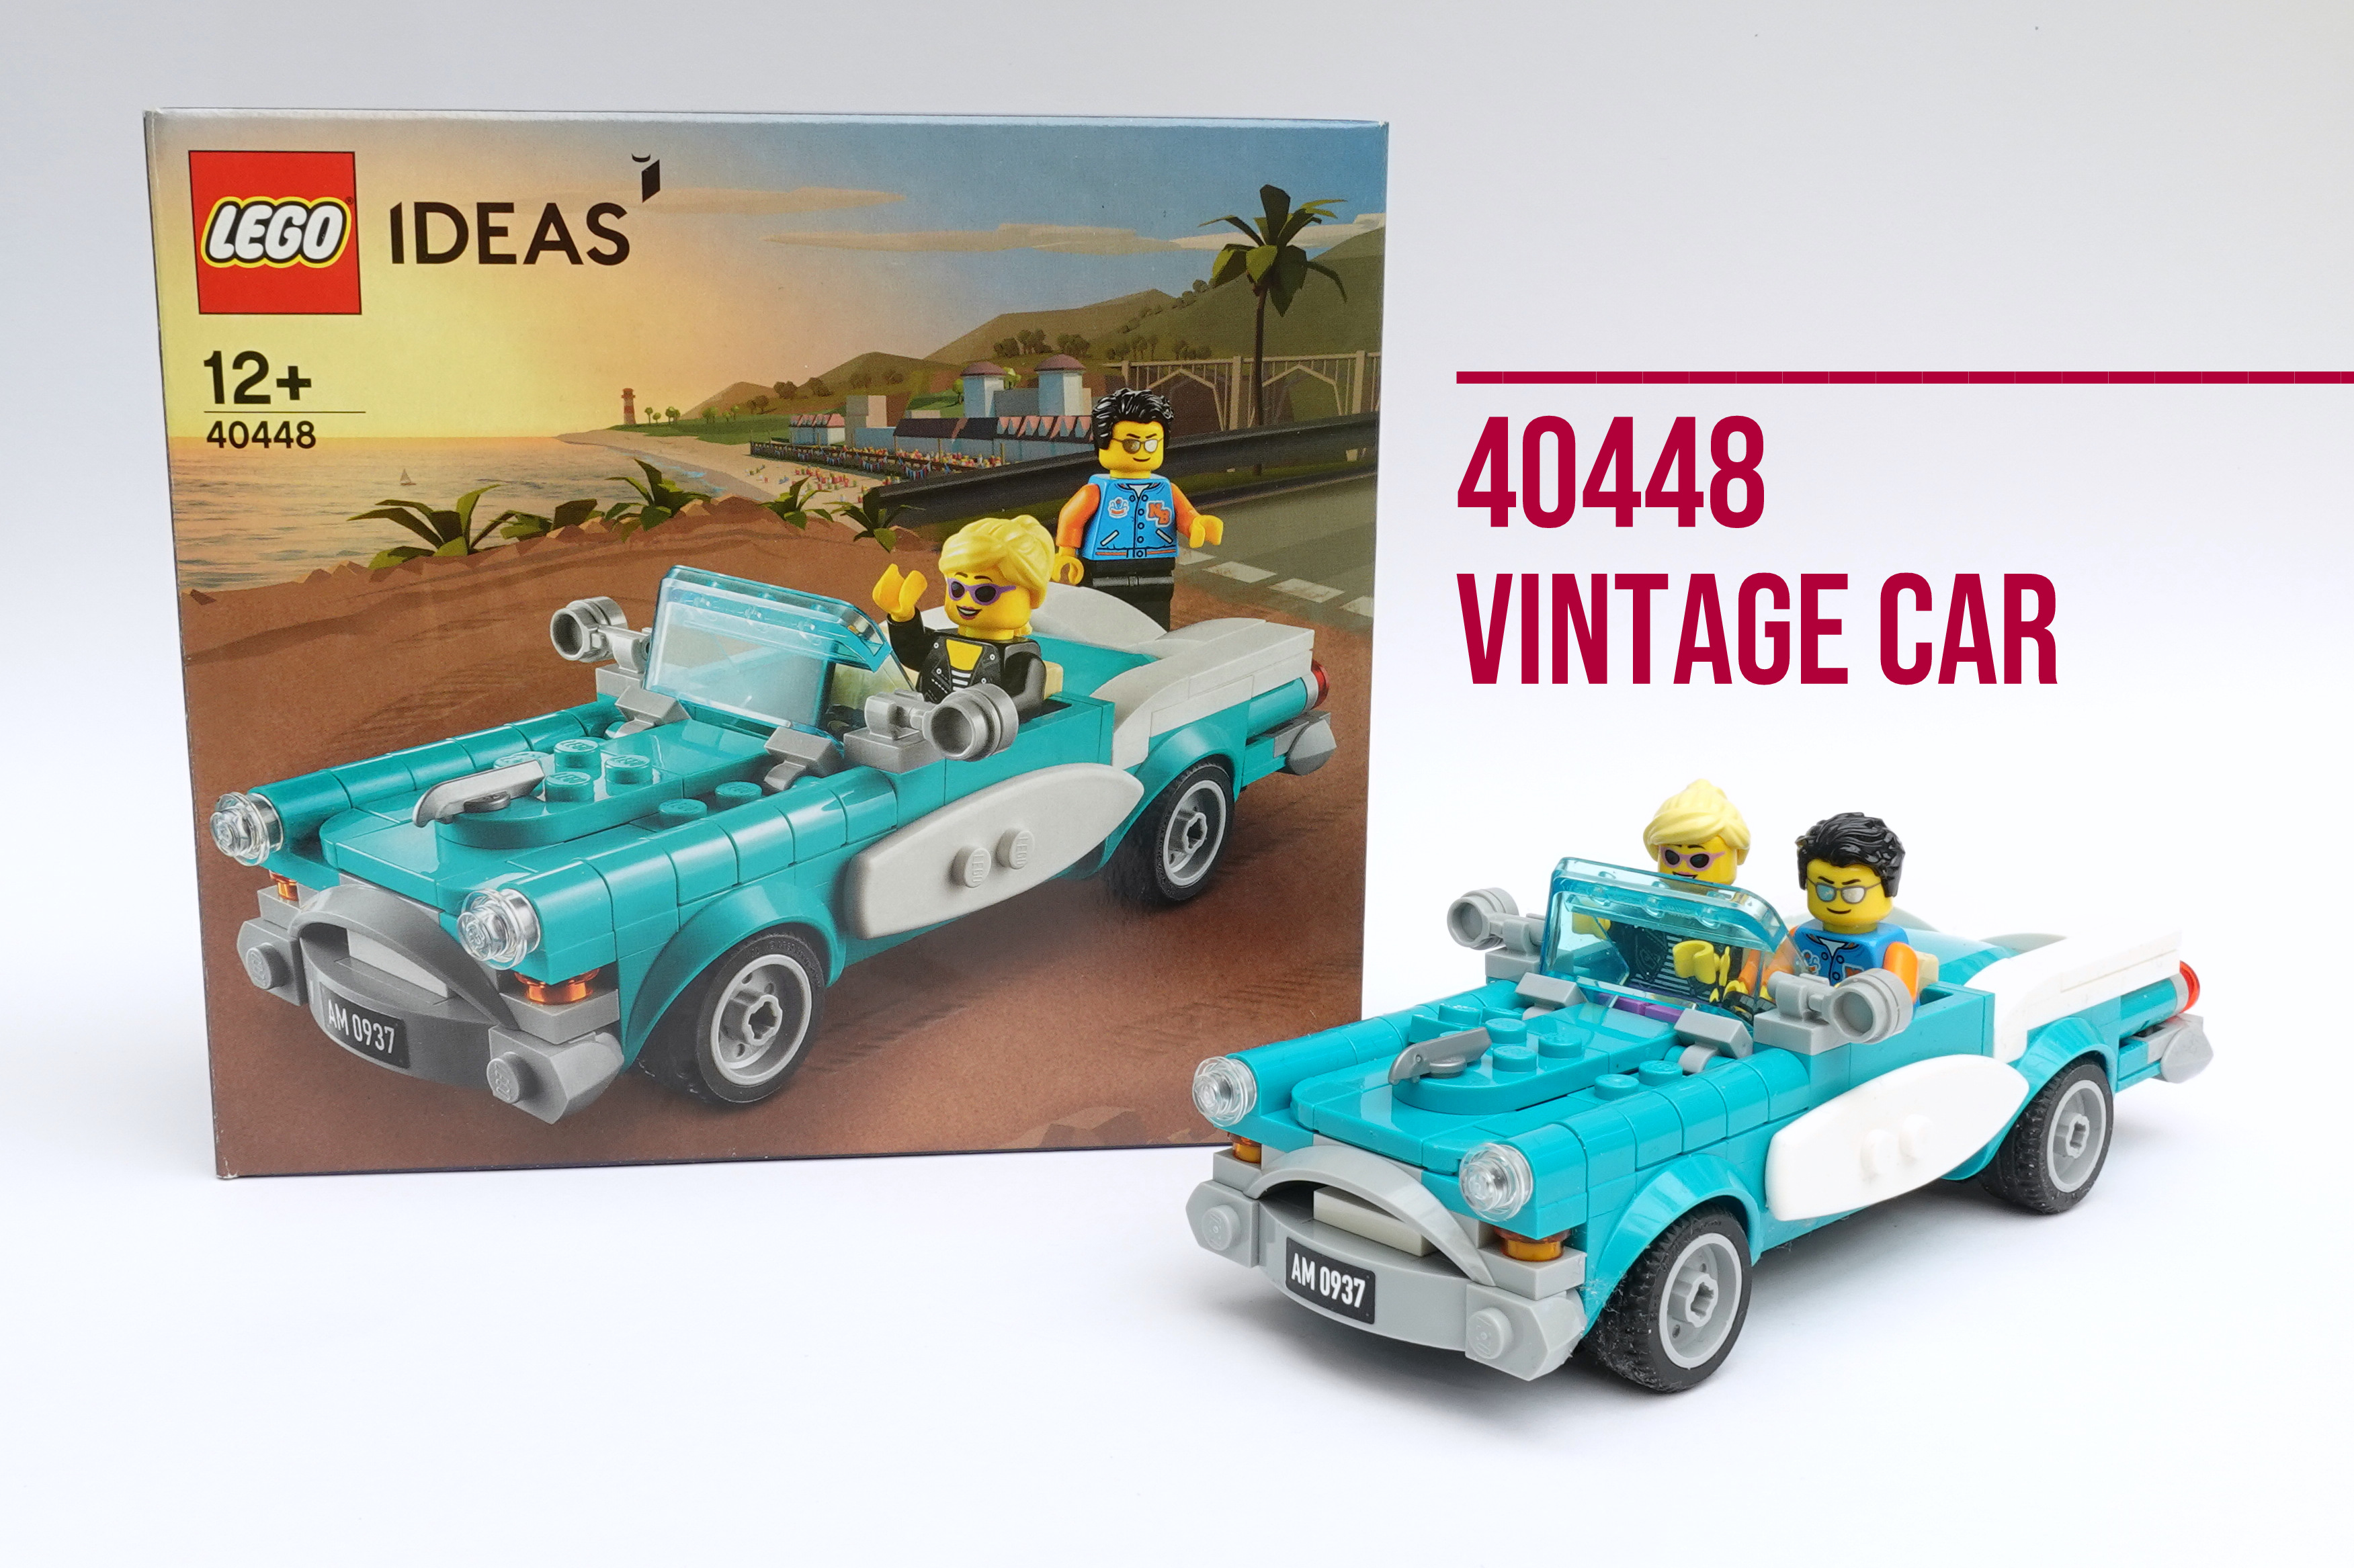 LEGO 40448 IDEAS VINTAGE CAR 189PCS BRAND NEW IN SEALED BOX AGES 12+ 